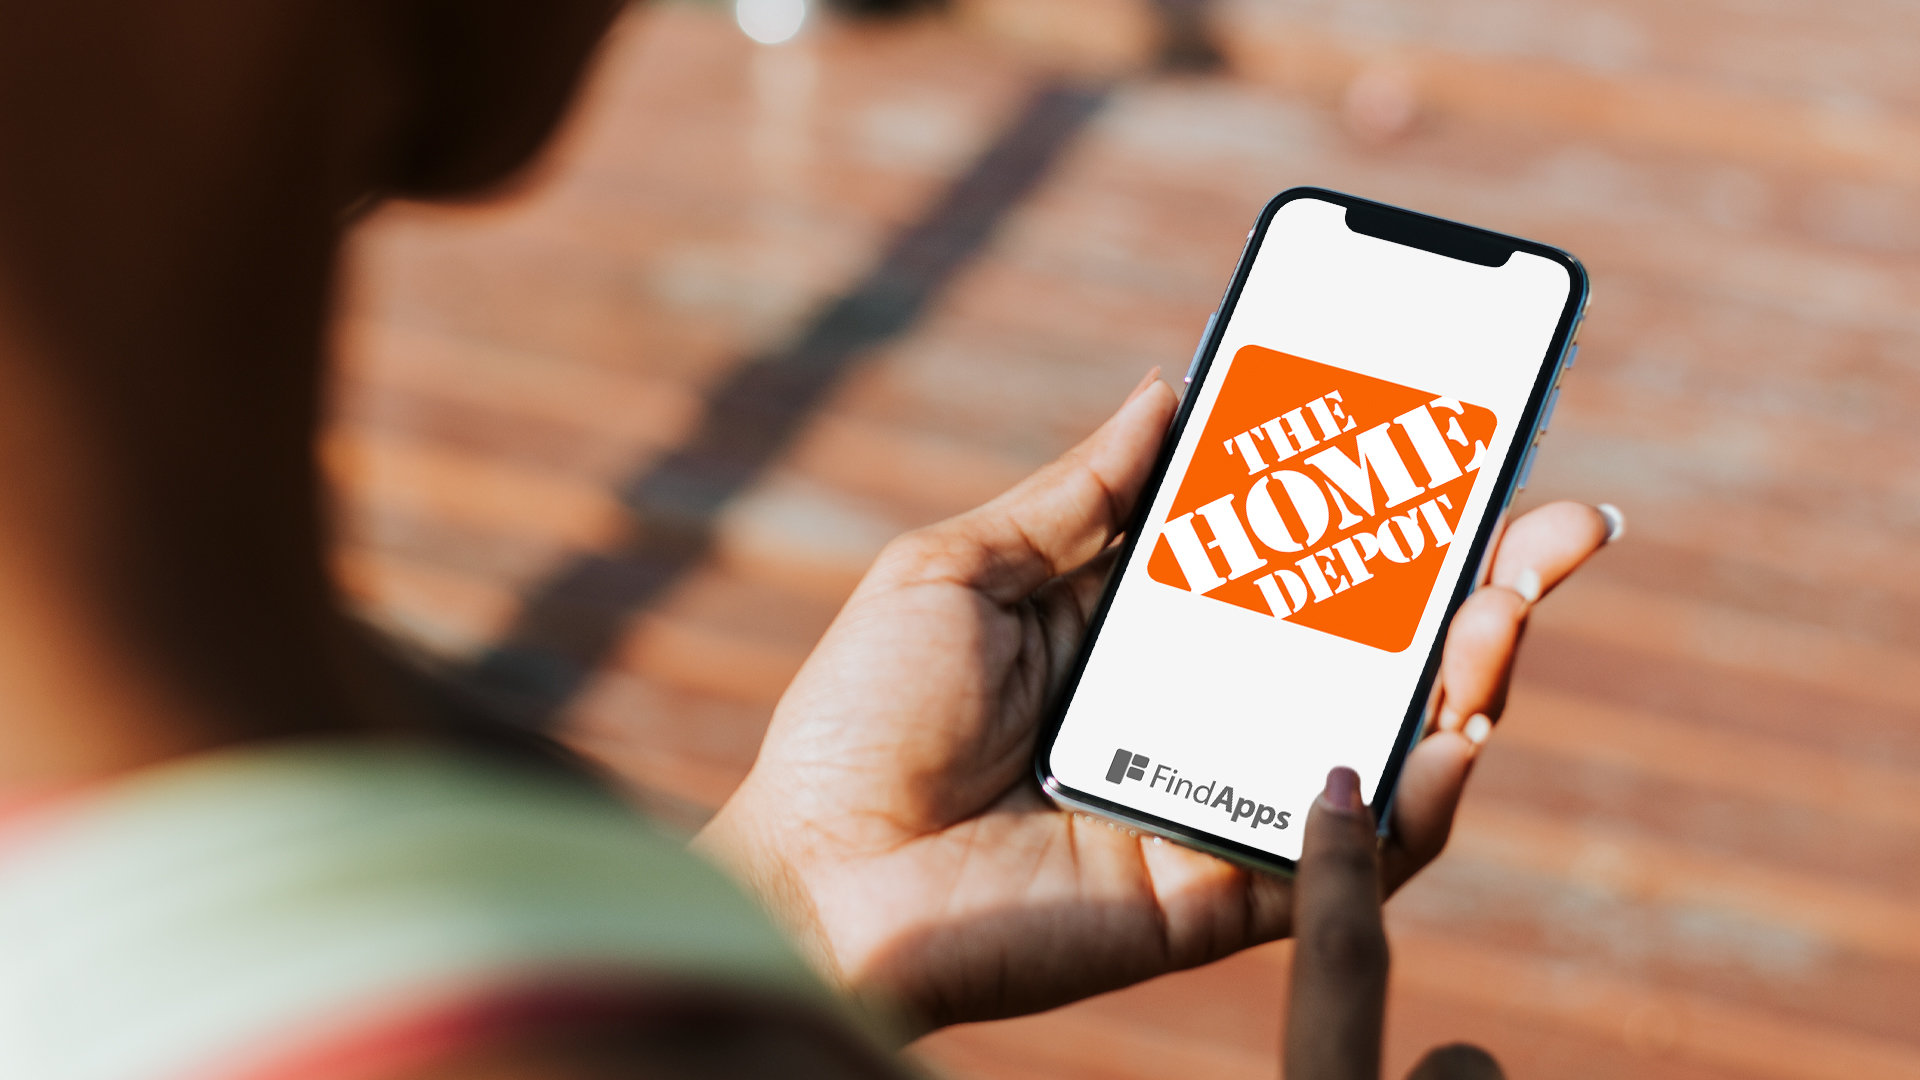 "The Home Depot" app, review.